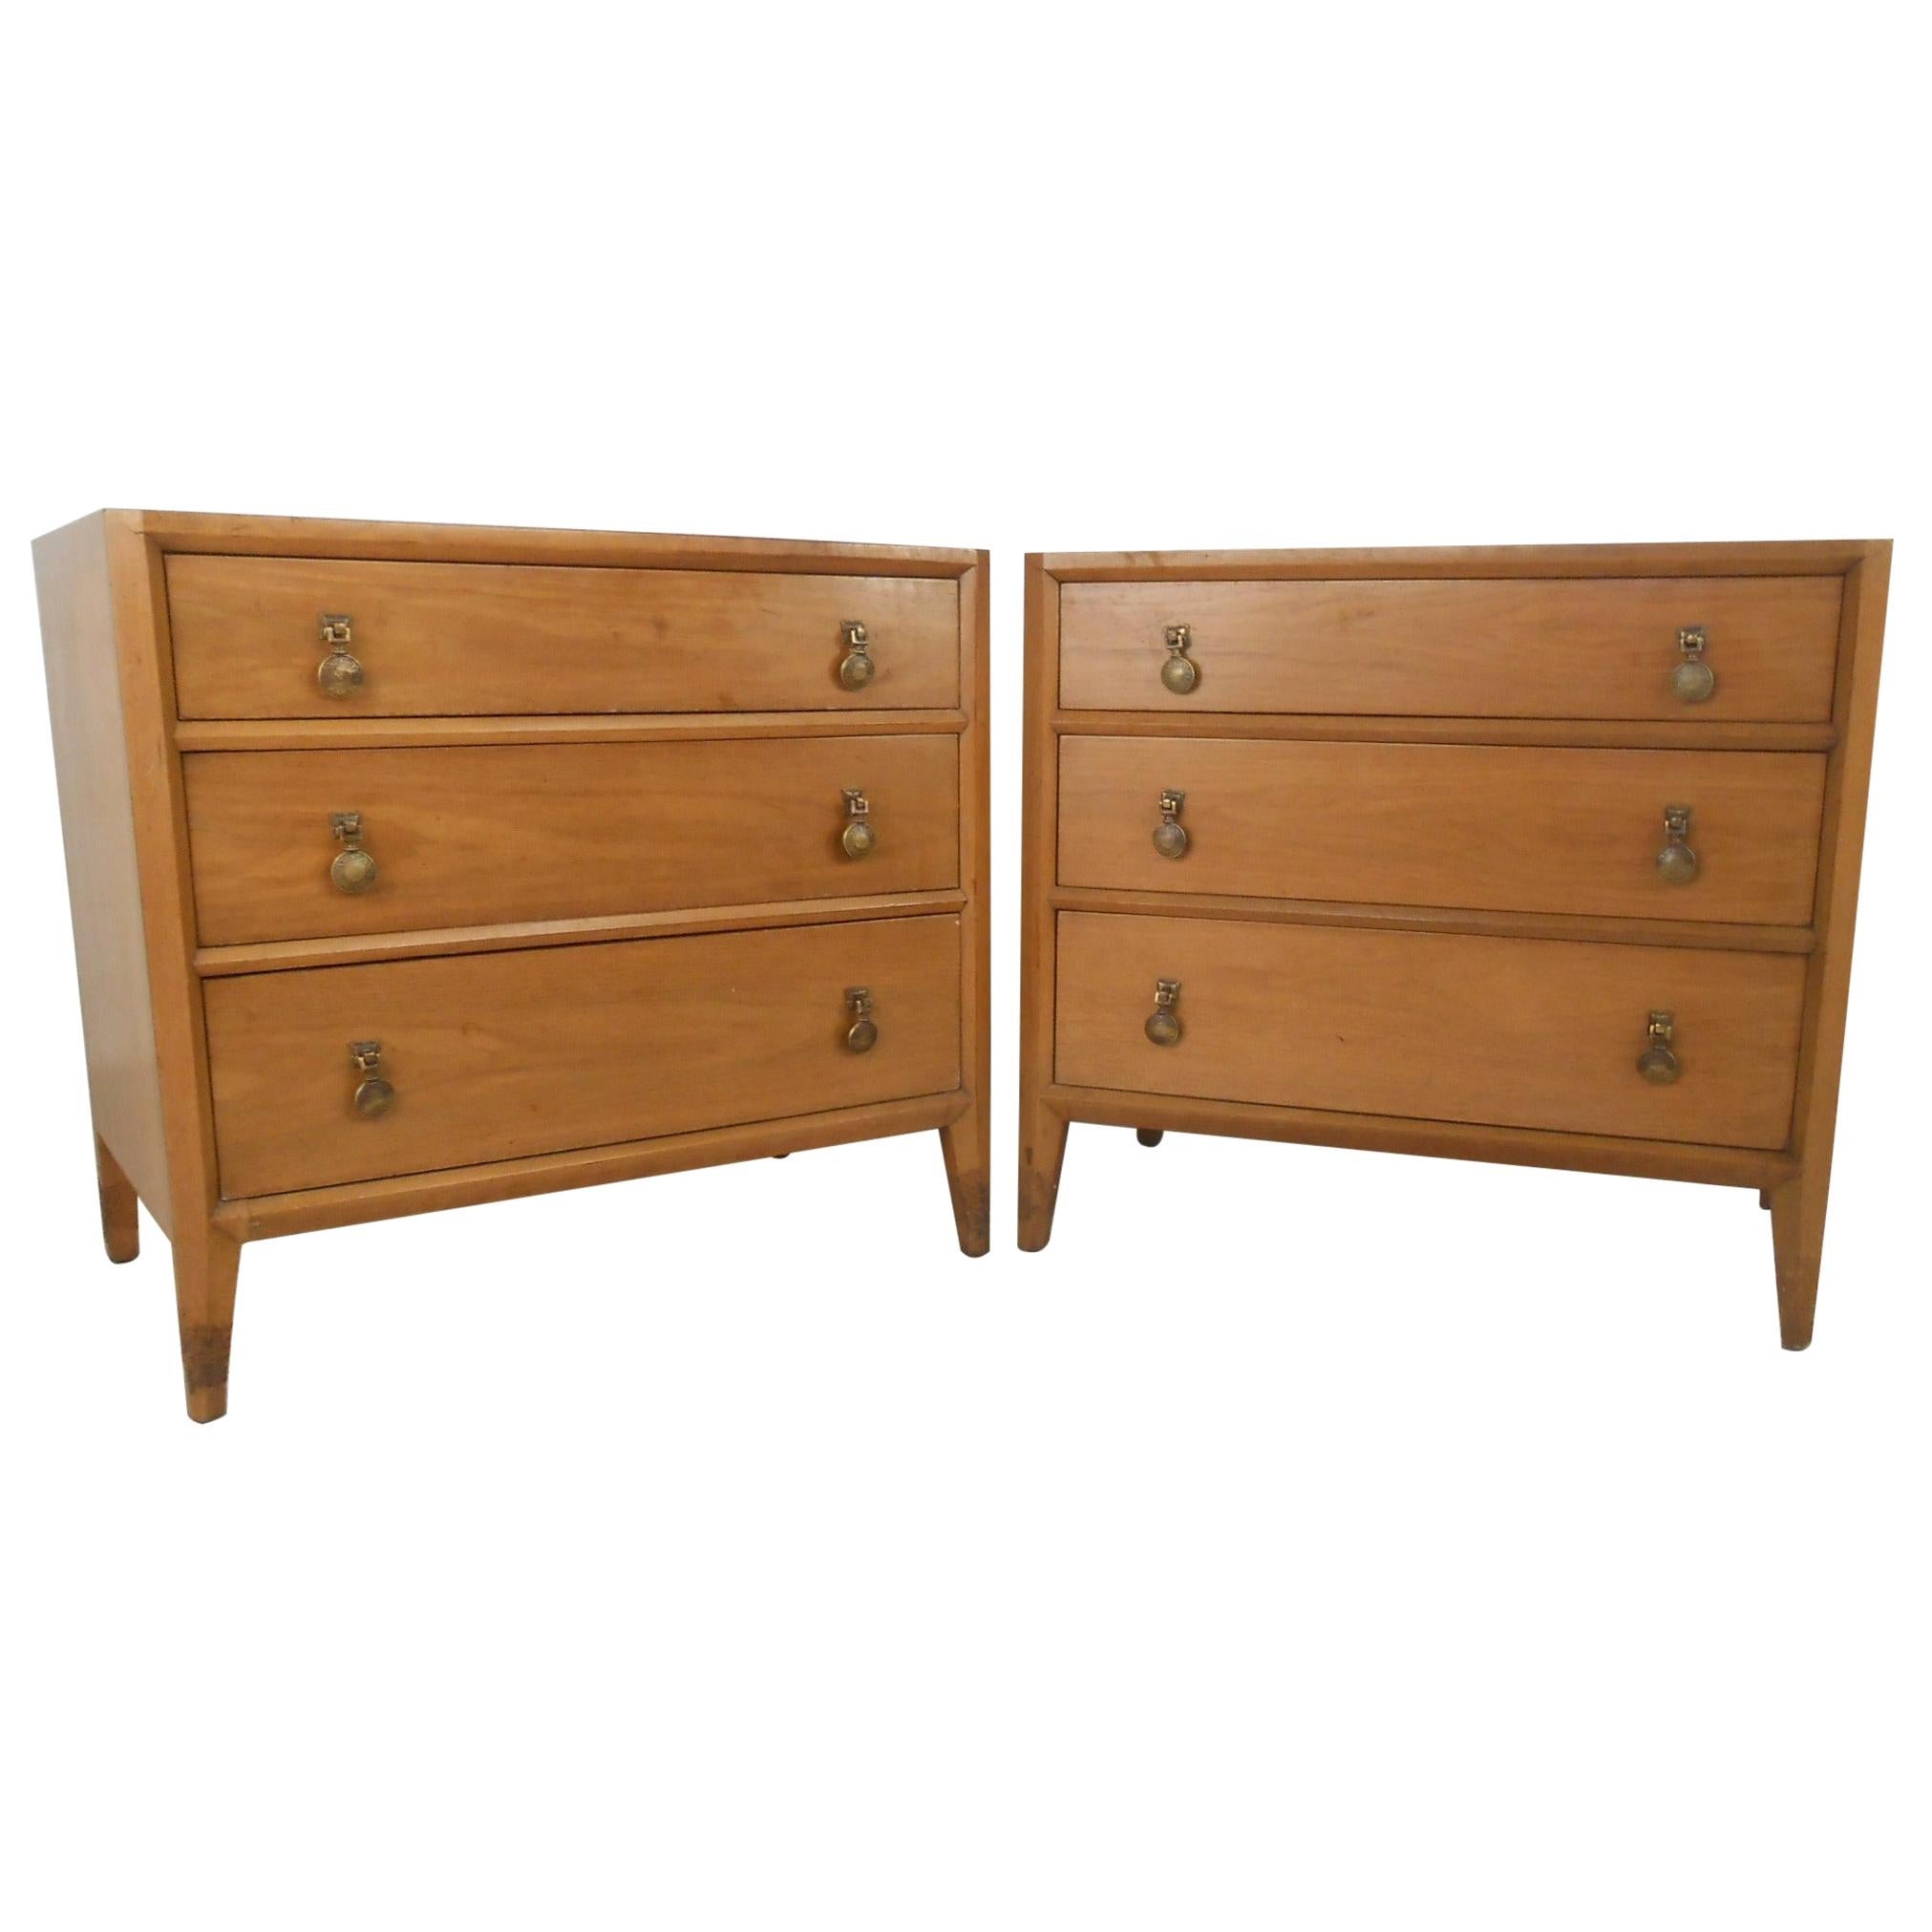 Pair of Midcentury Three-Drawer Dressers by Mount Airy